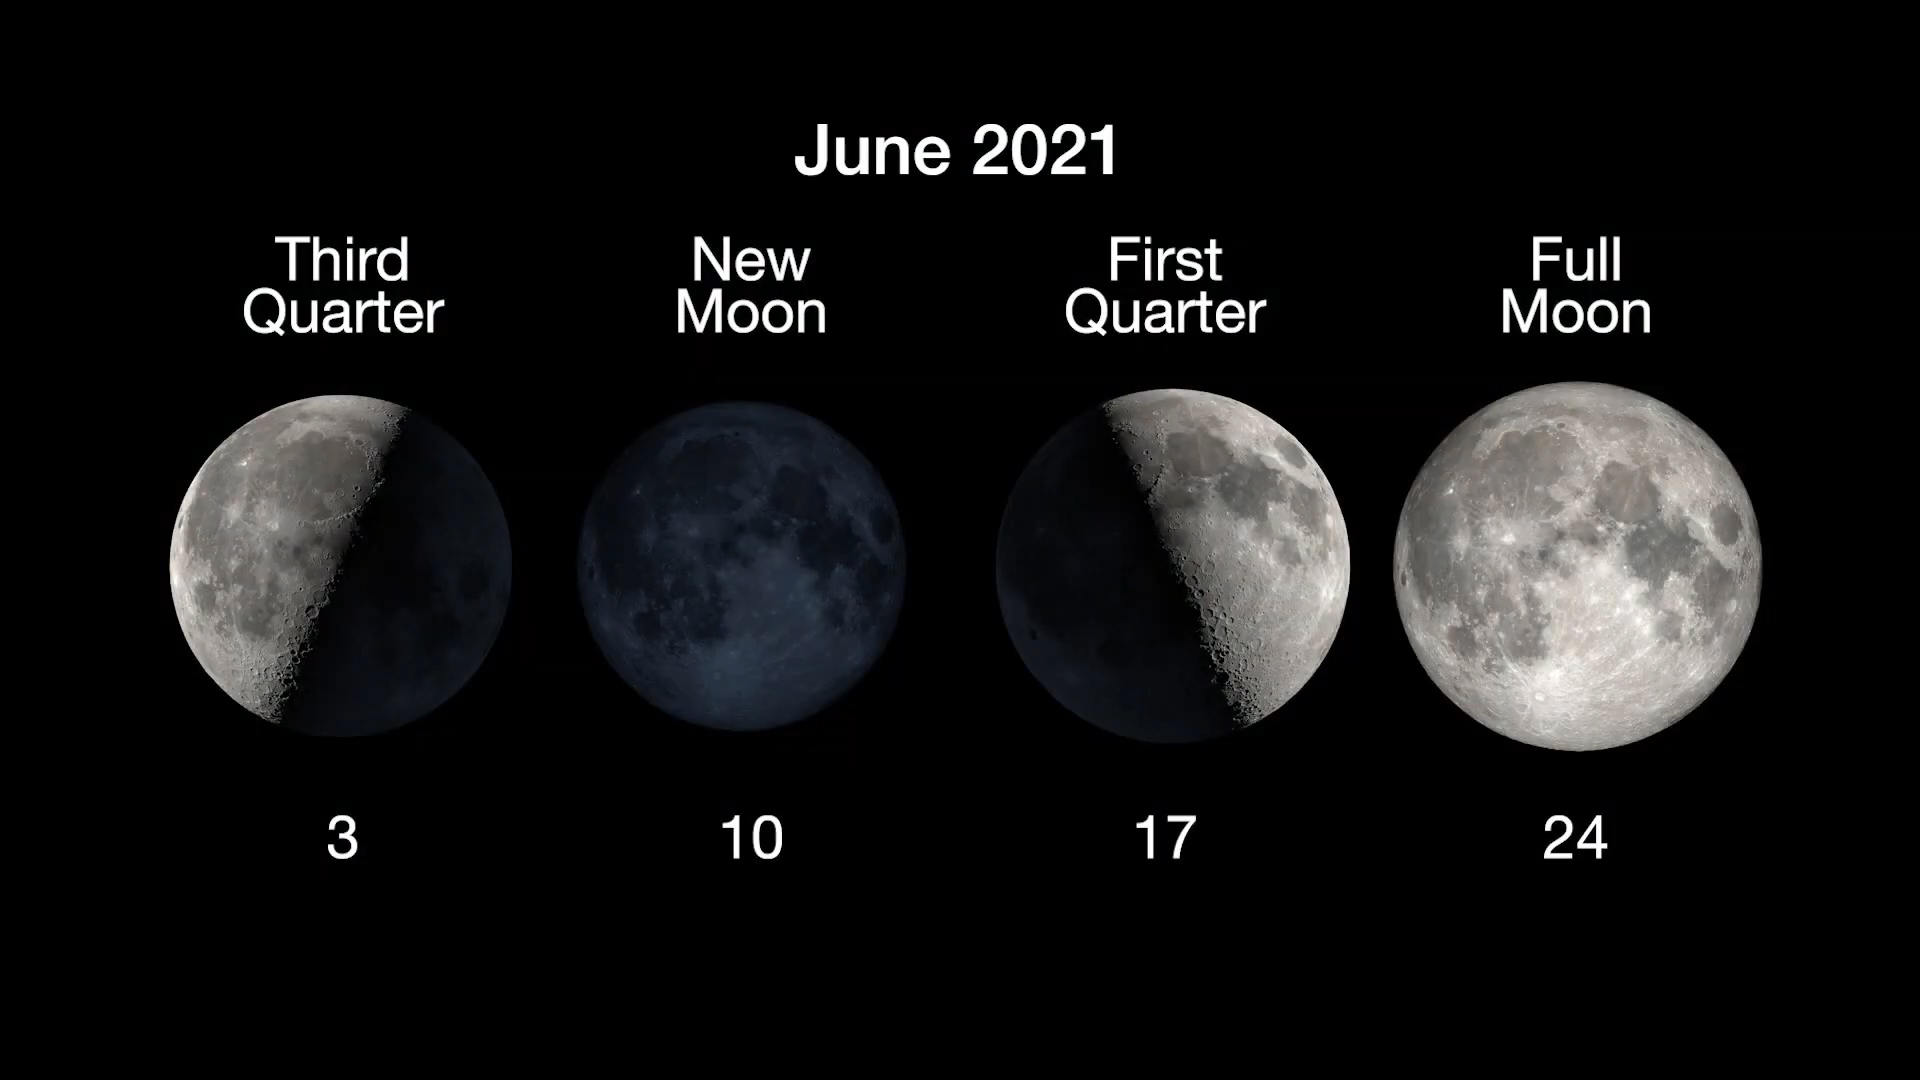 MoonPhases_June 2021